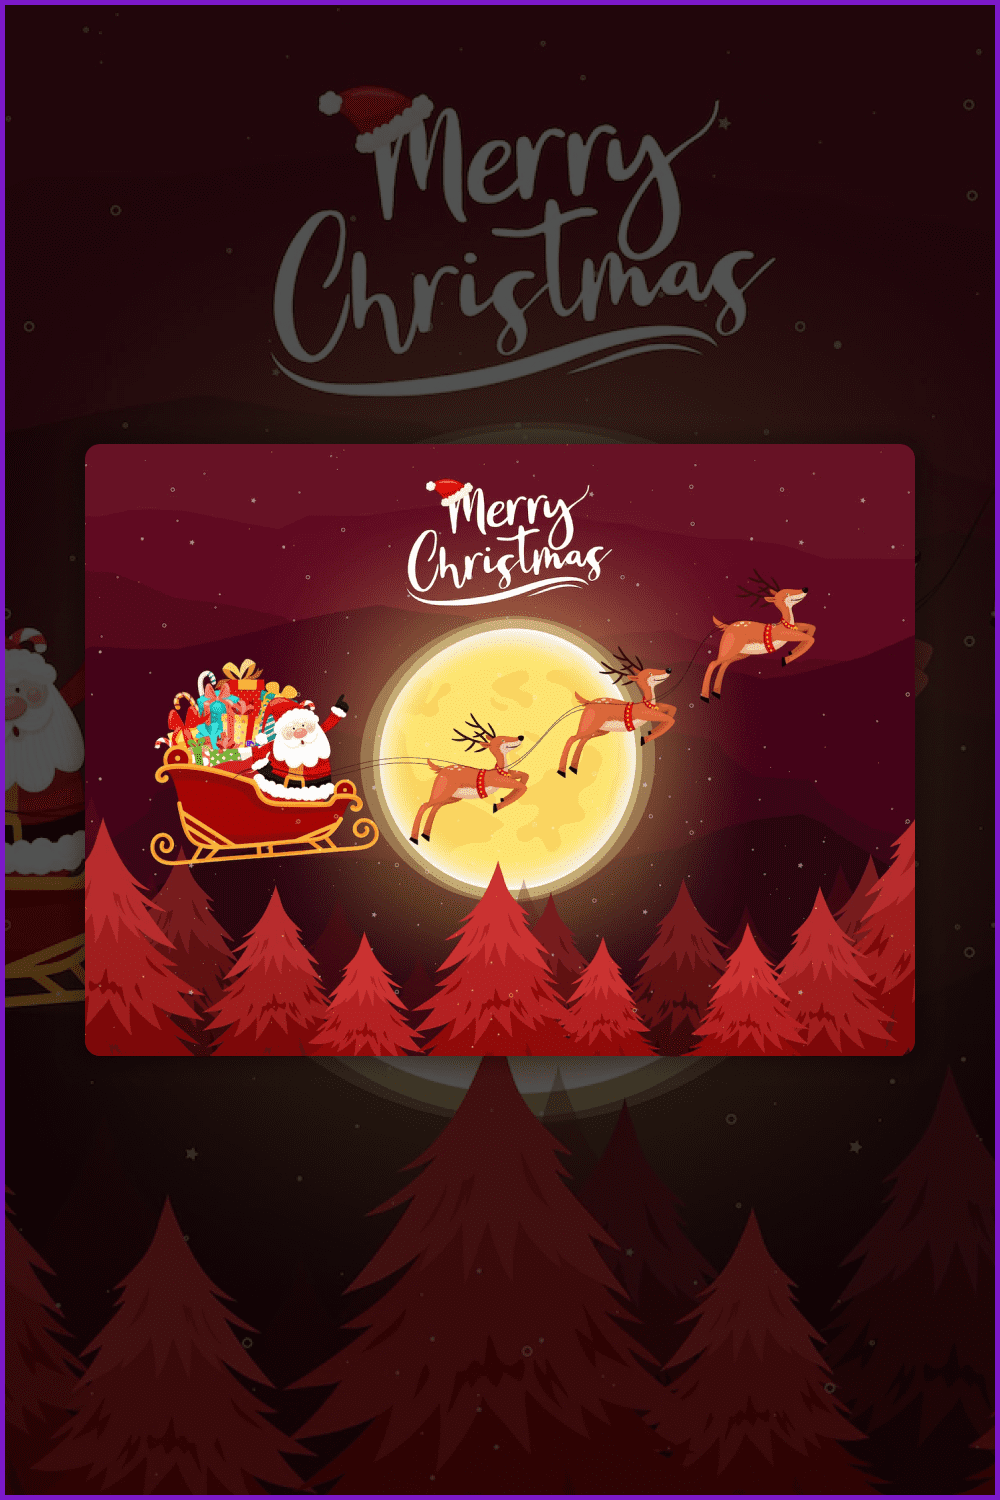 Drawing of Santa Claus in a sleigh with gifts against the background of the moon and red forest.